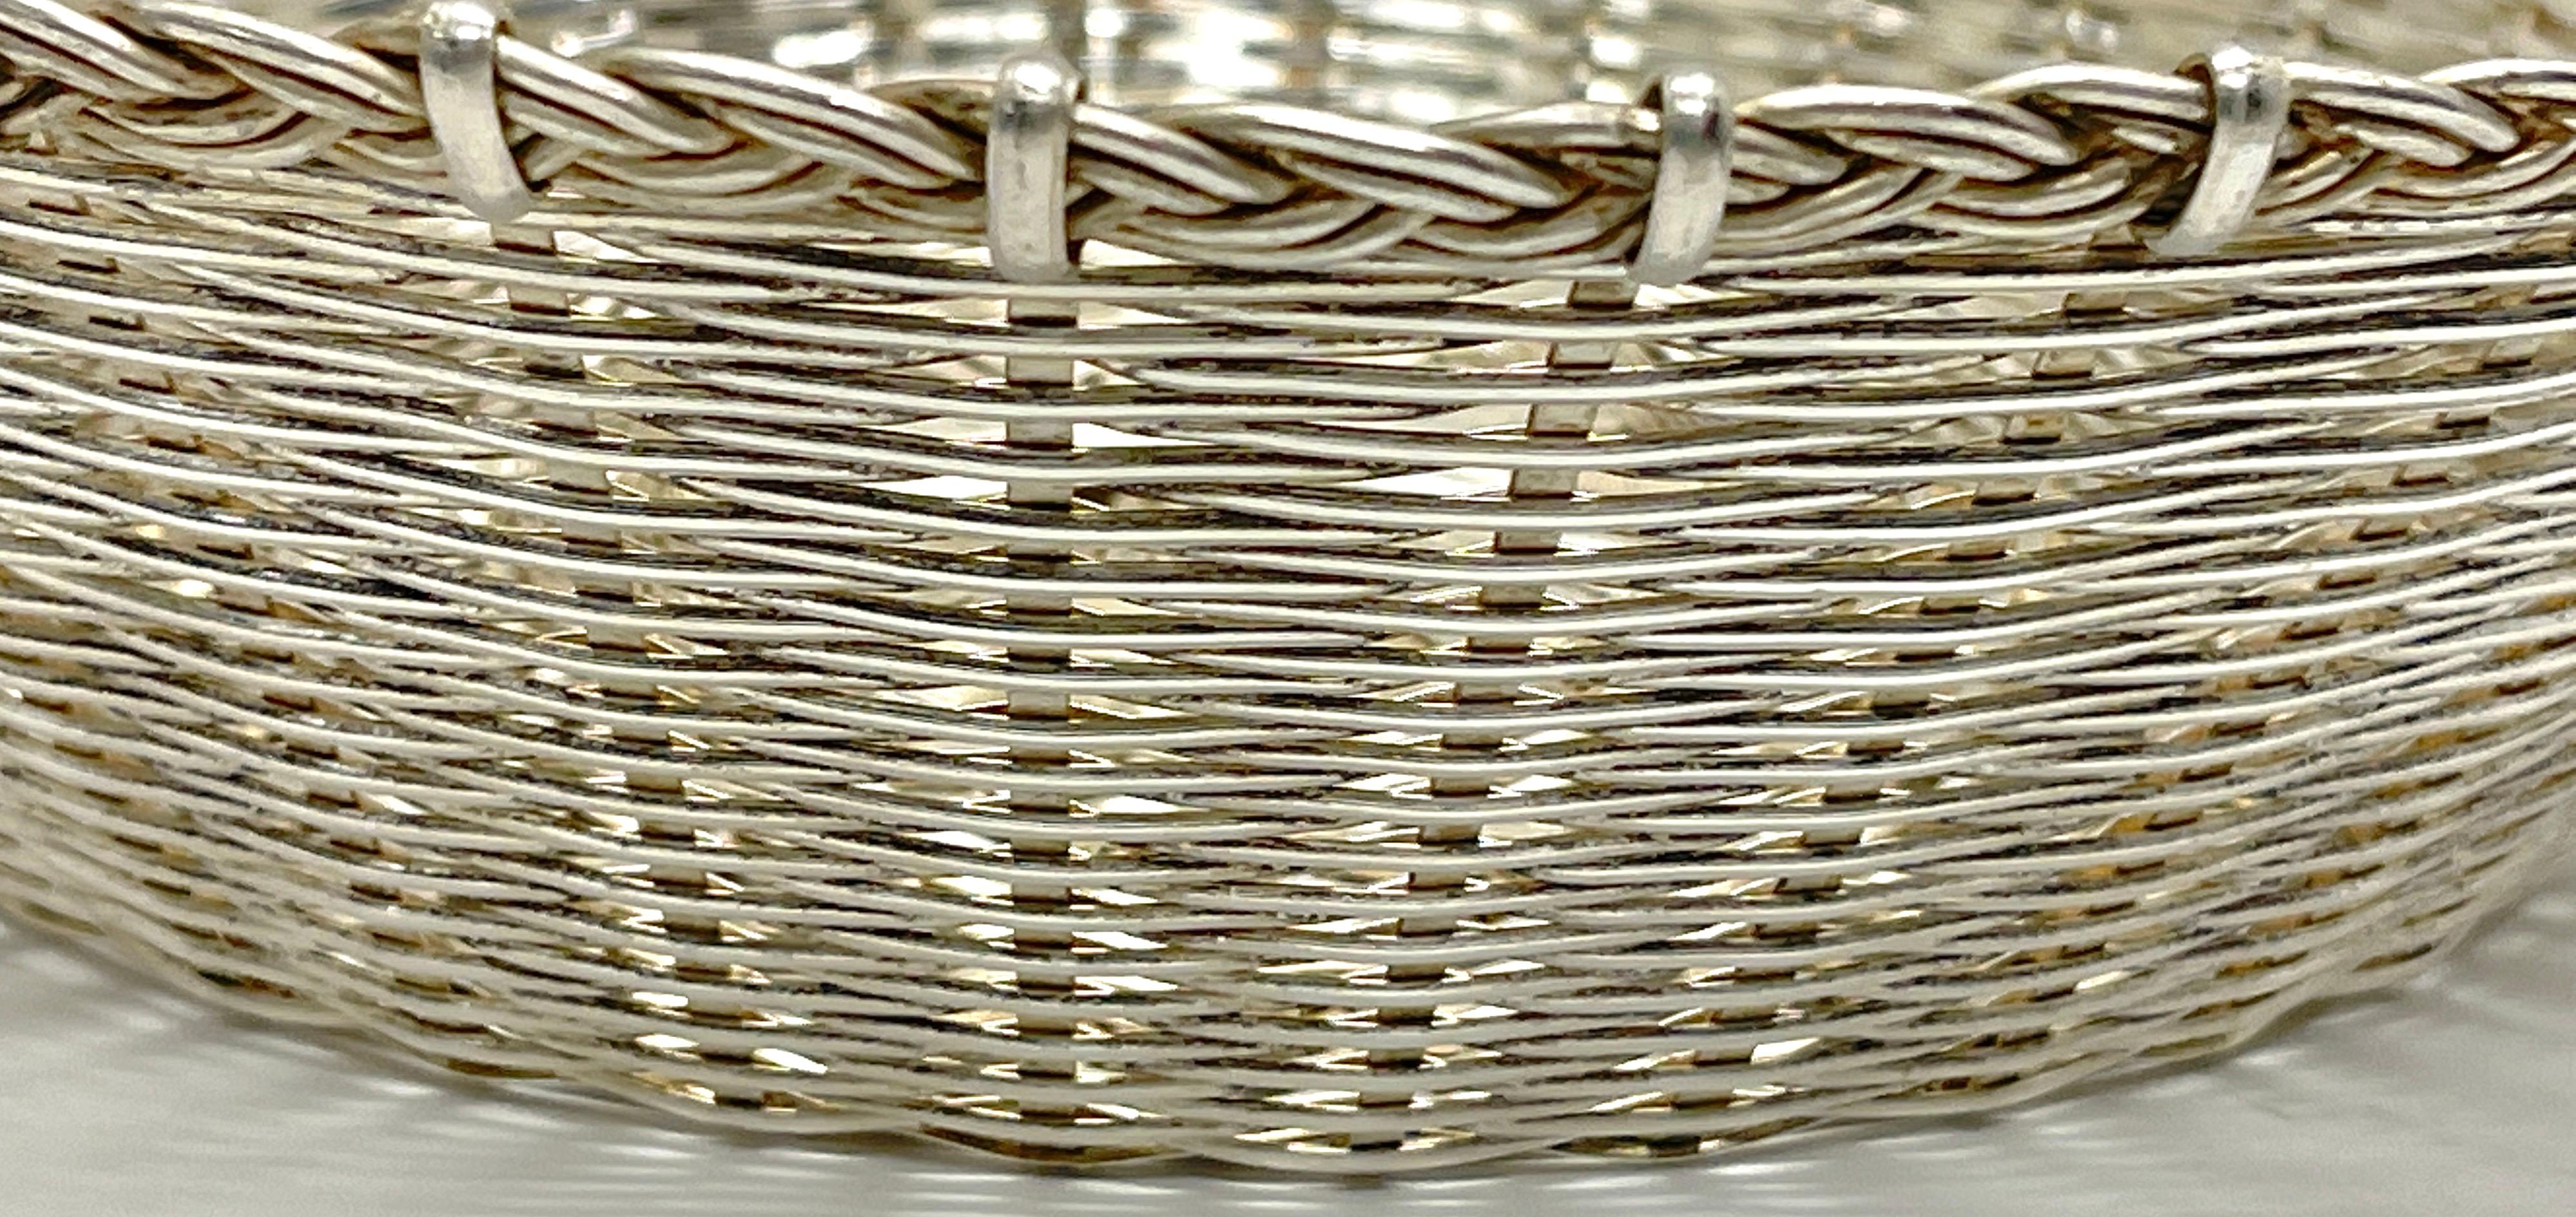 Pair of Christofle 'Atrib.' Silverplated Woven Baskets For Sale 3